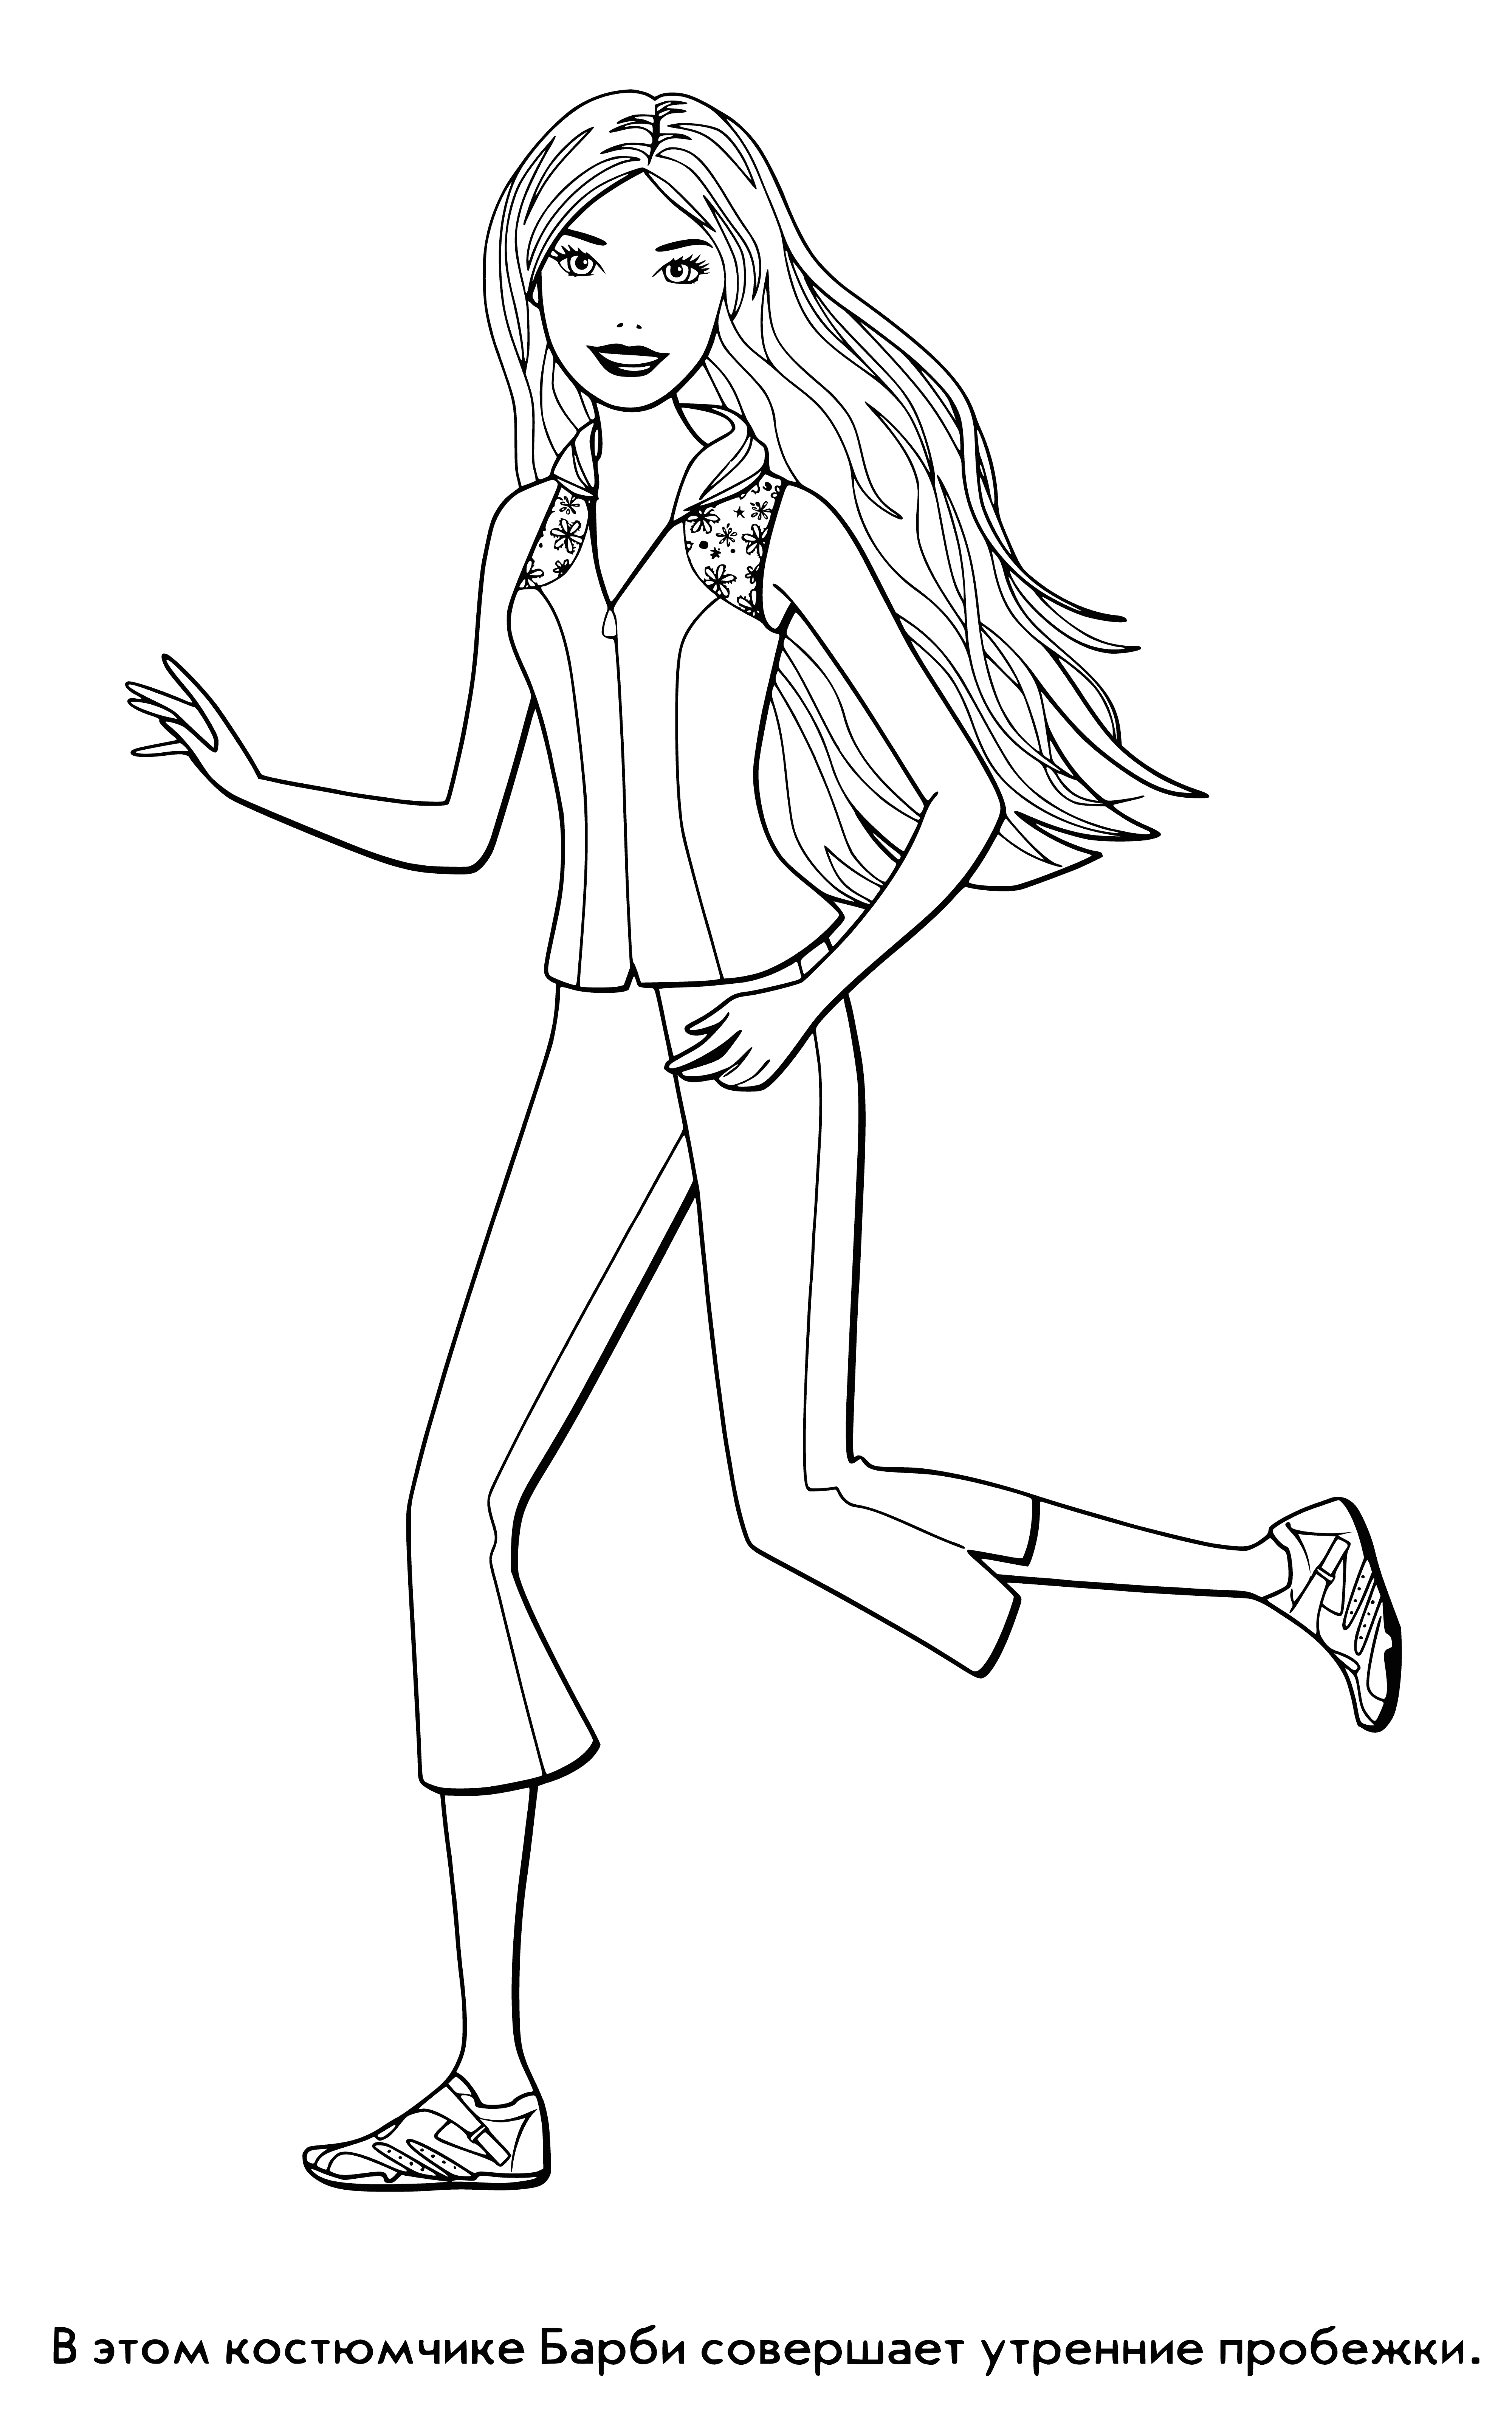 coloring page: Girl running in park, wearing pink top & black leggings. Blonde hair in ponytail & she's holding a water bottle.